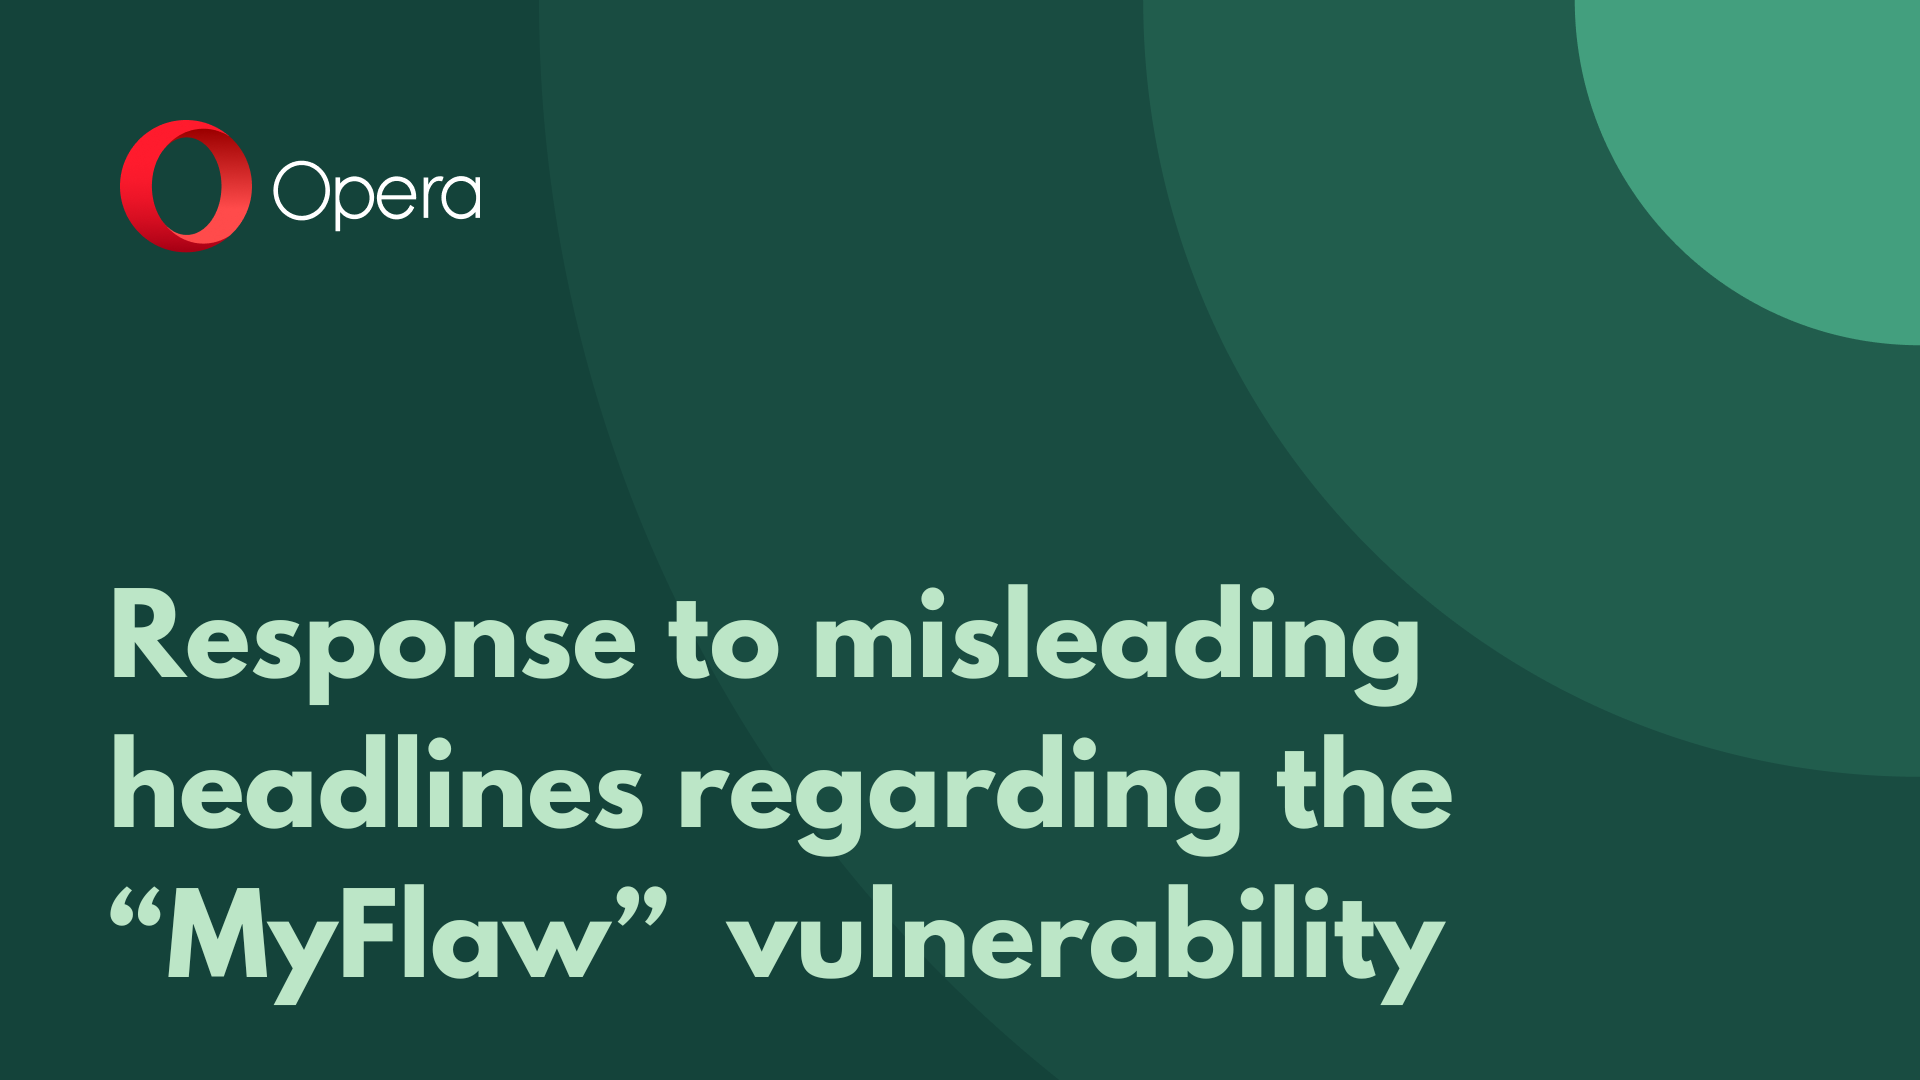 Opera’s response to misleading headlines regarding the “MyFlaw” security vulnerability